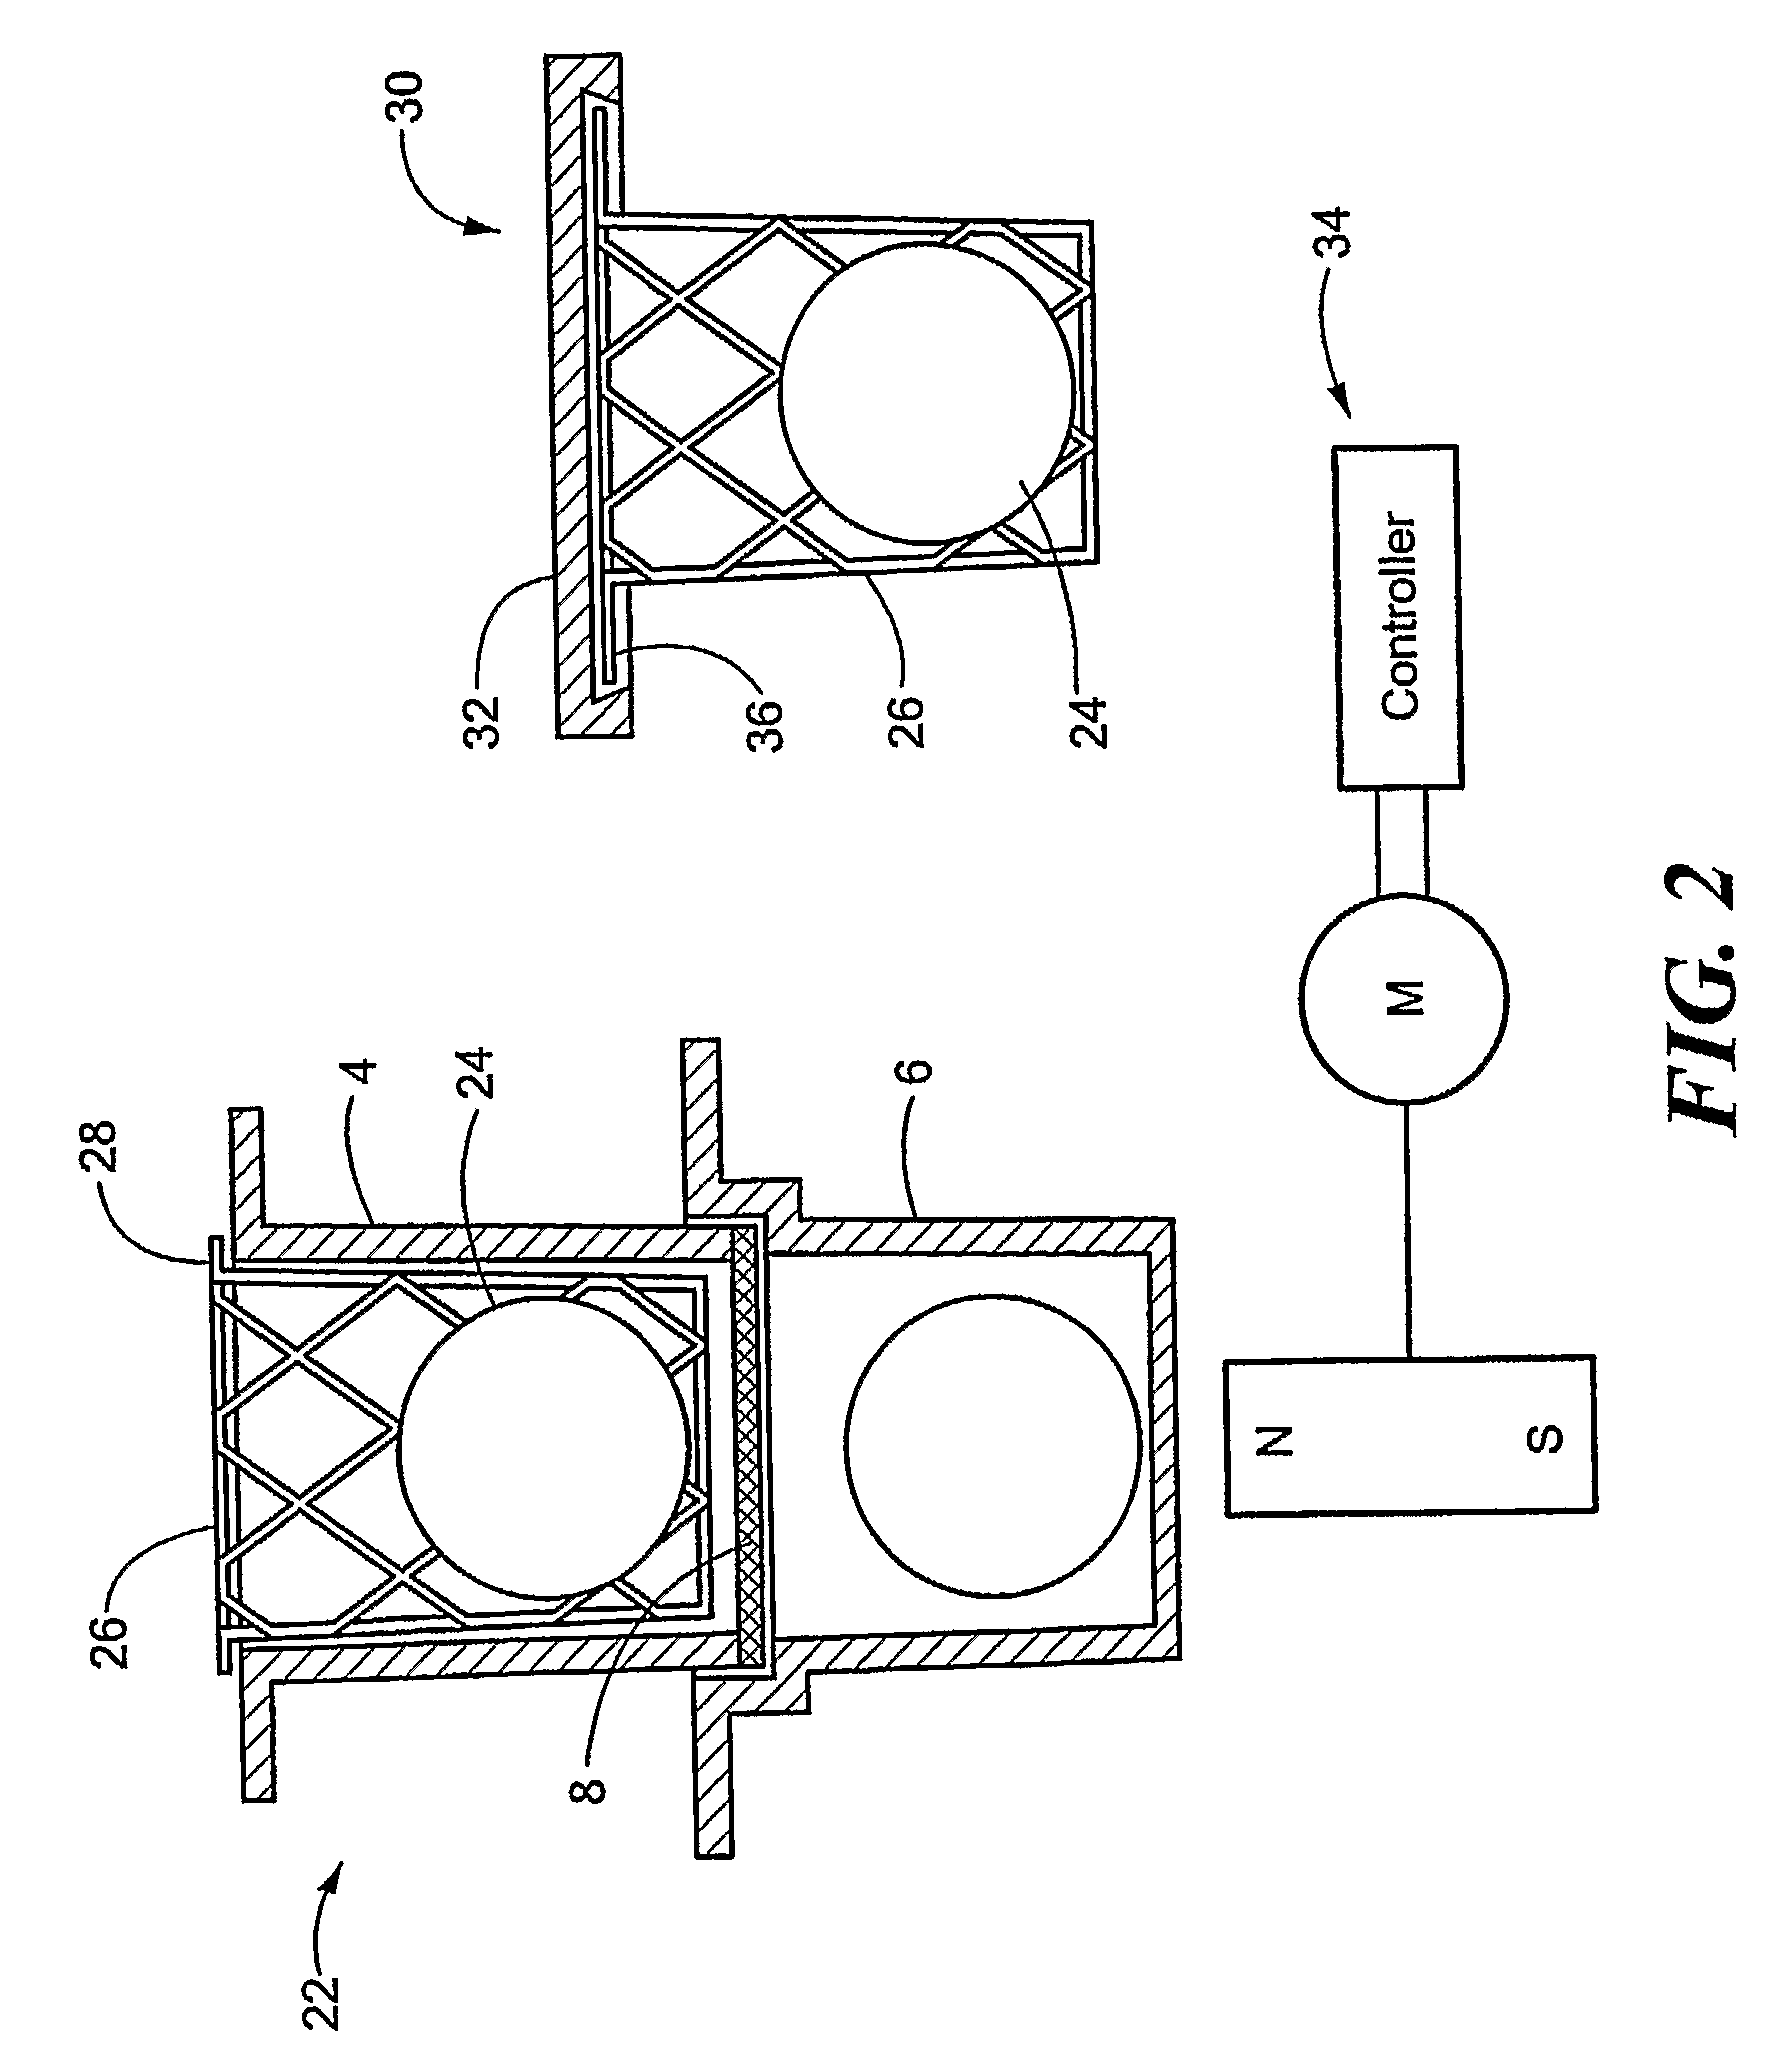 Permeation Device and Method for Reducing Aqueous Boundary Layer Thicknesses